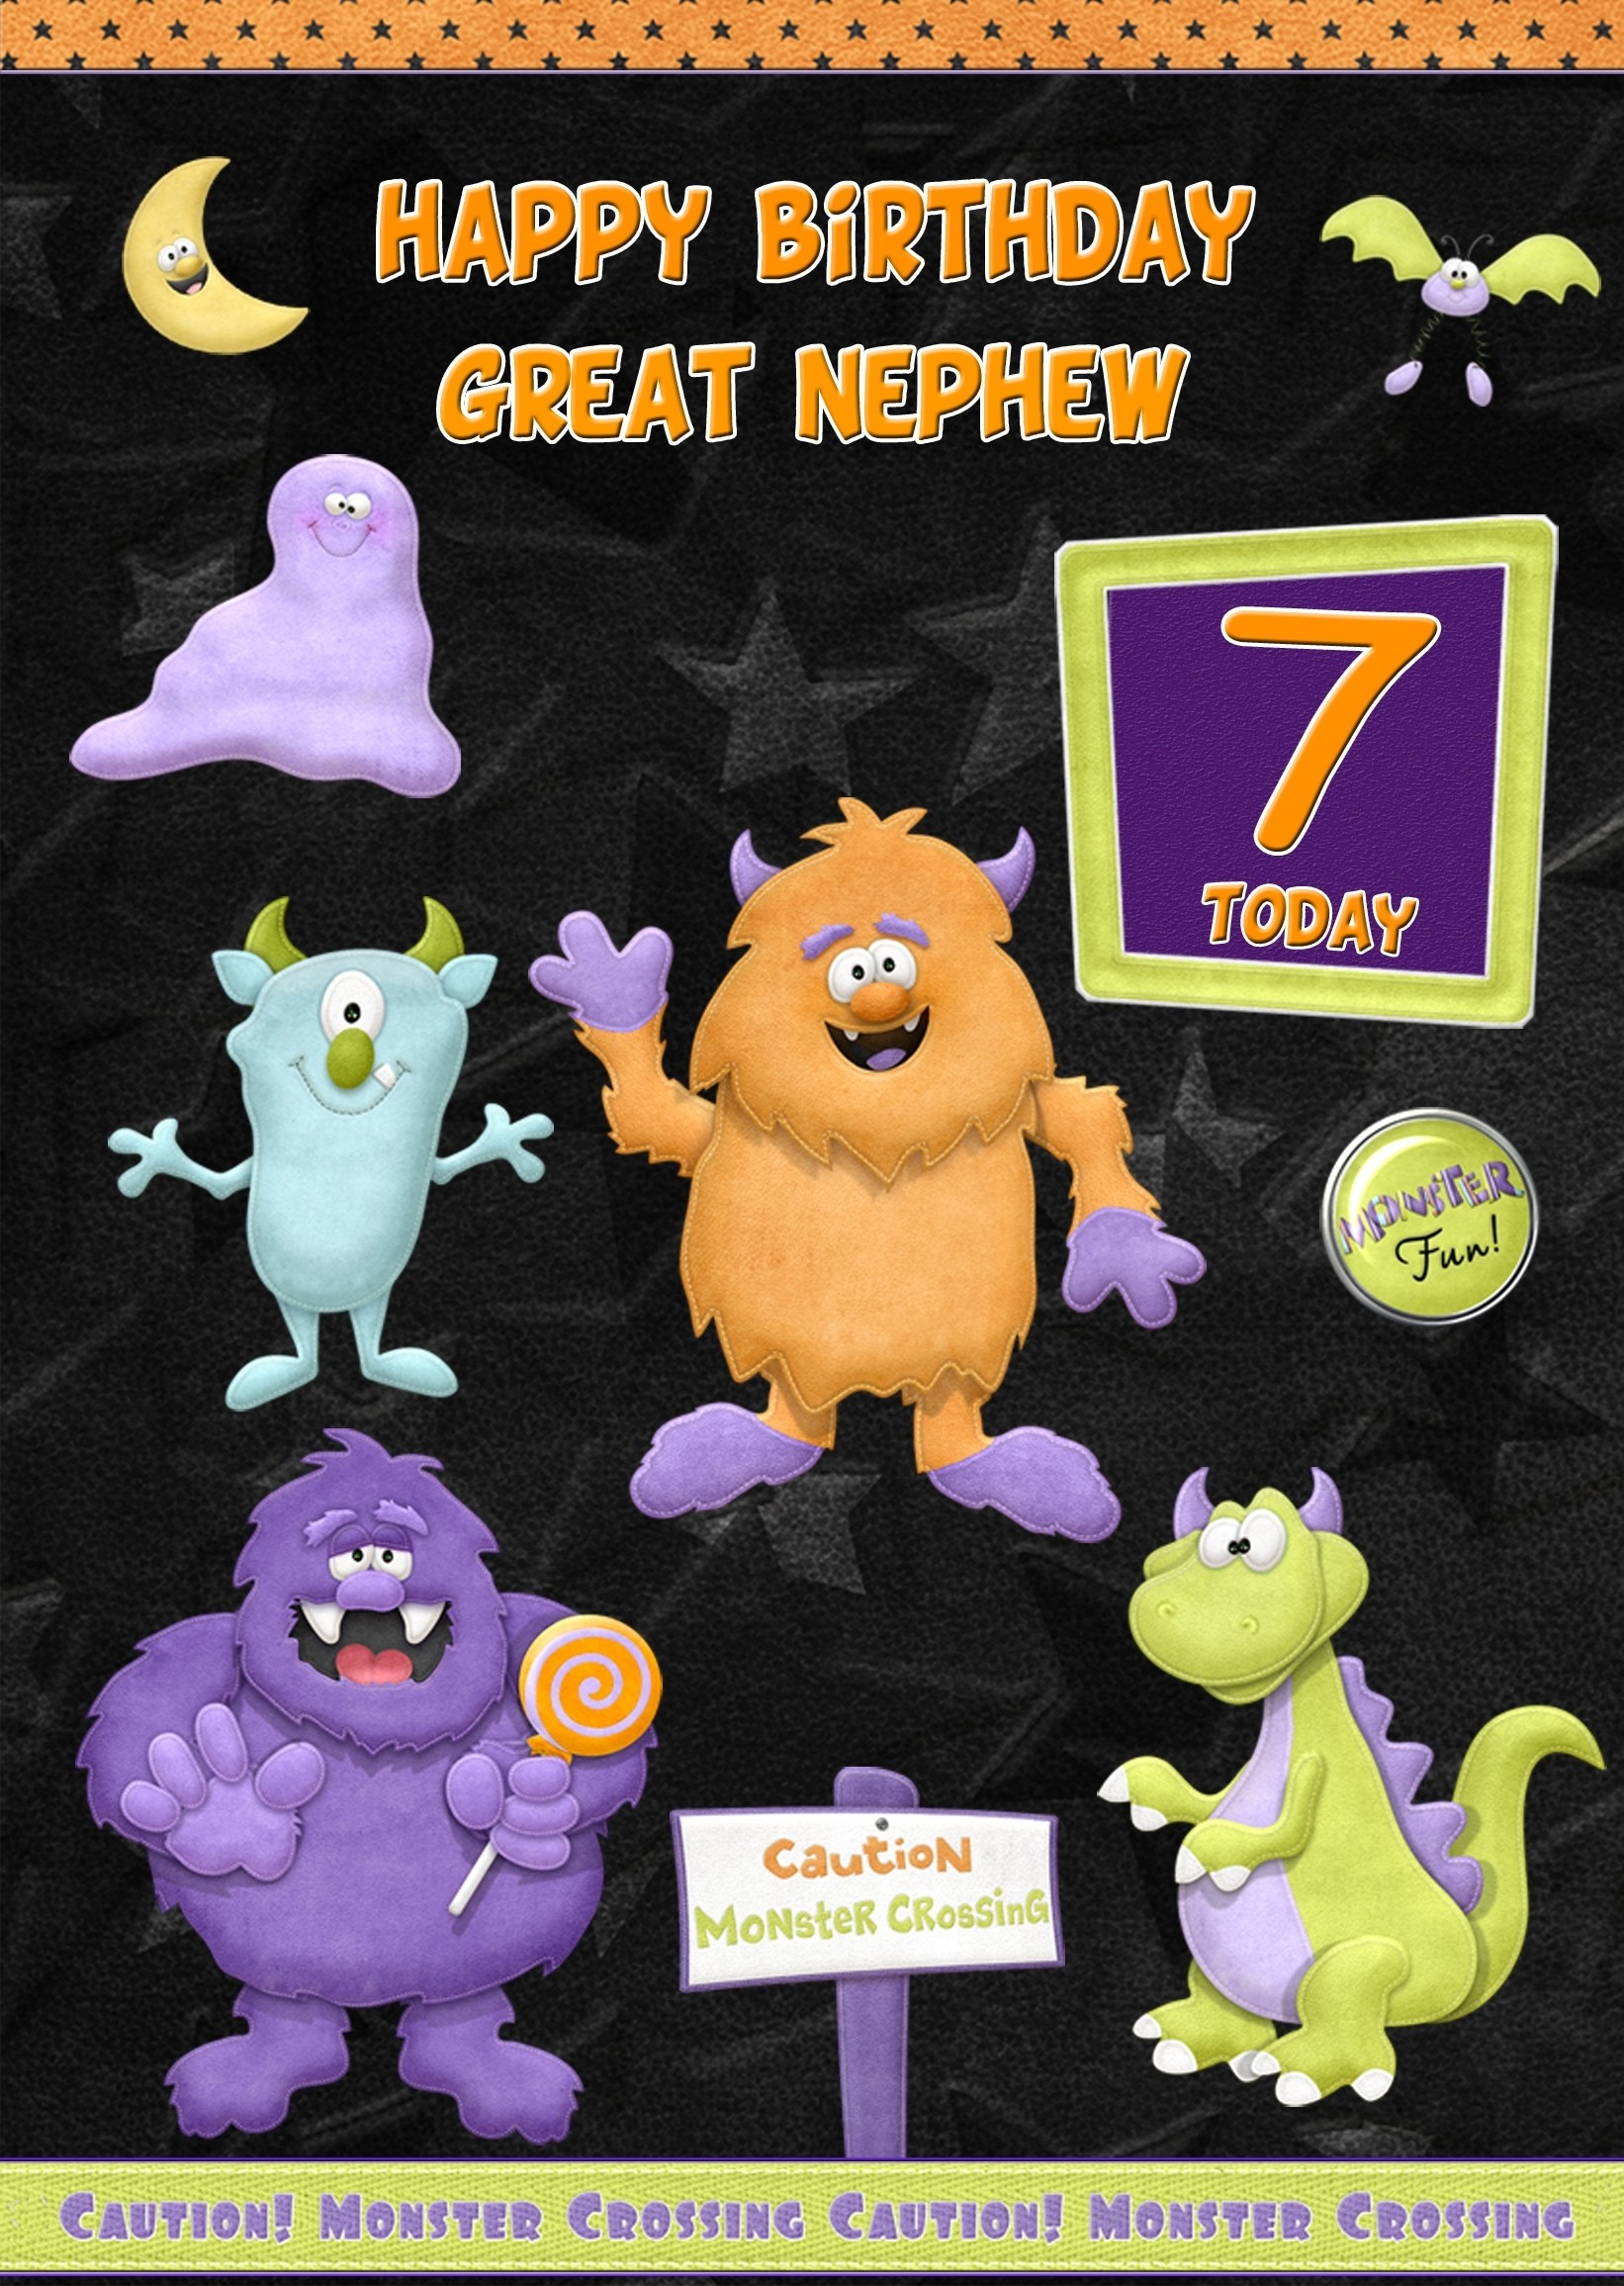 Kids 7th Birthday Funny Monster Cartoon Card for Great Nephew